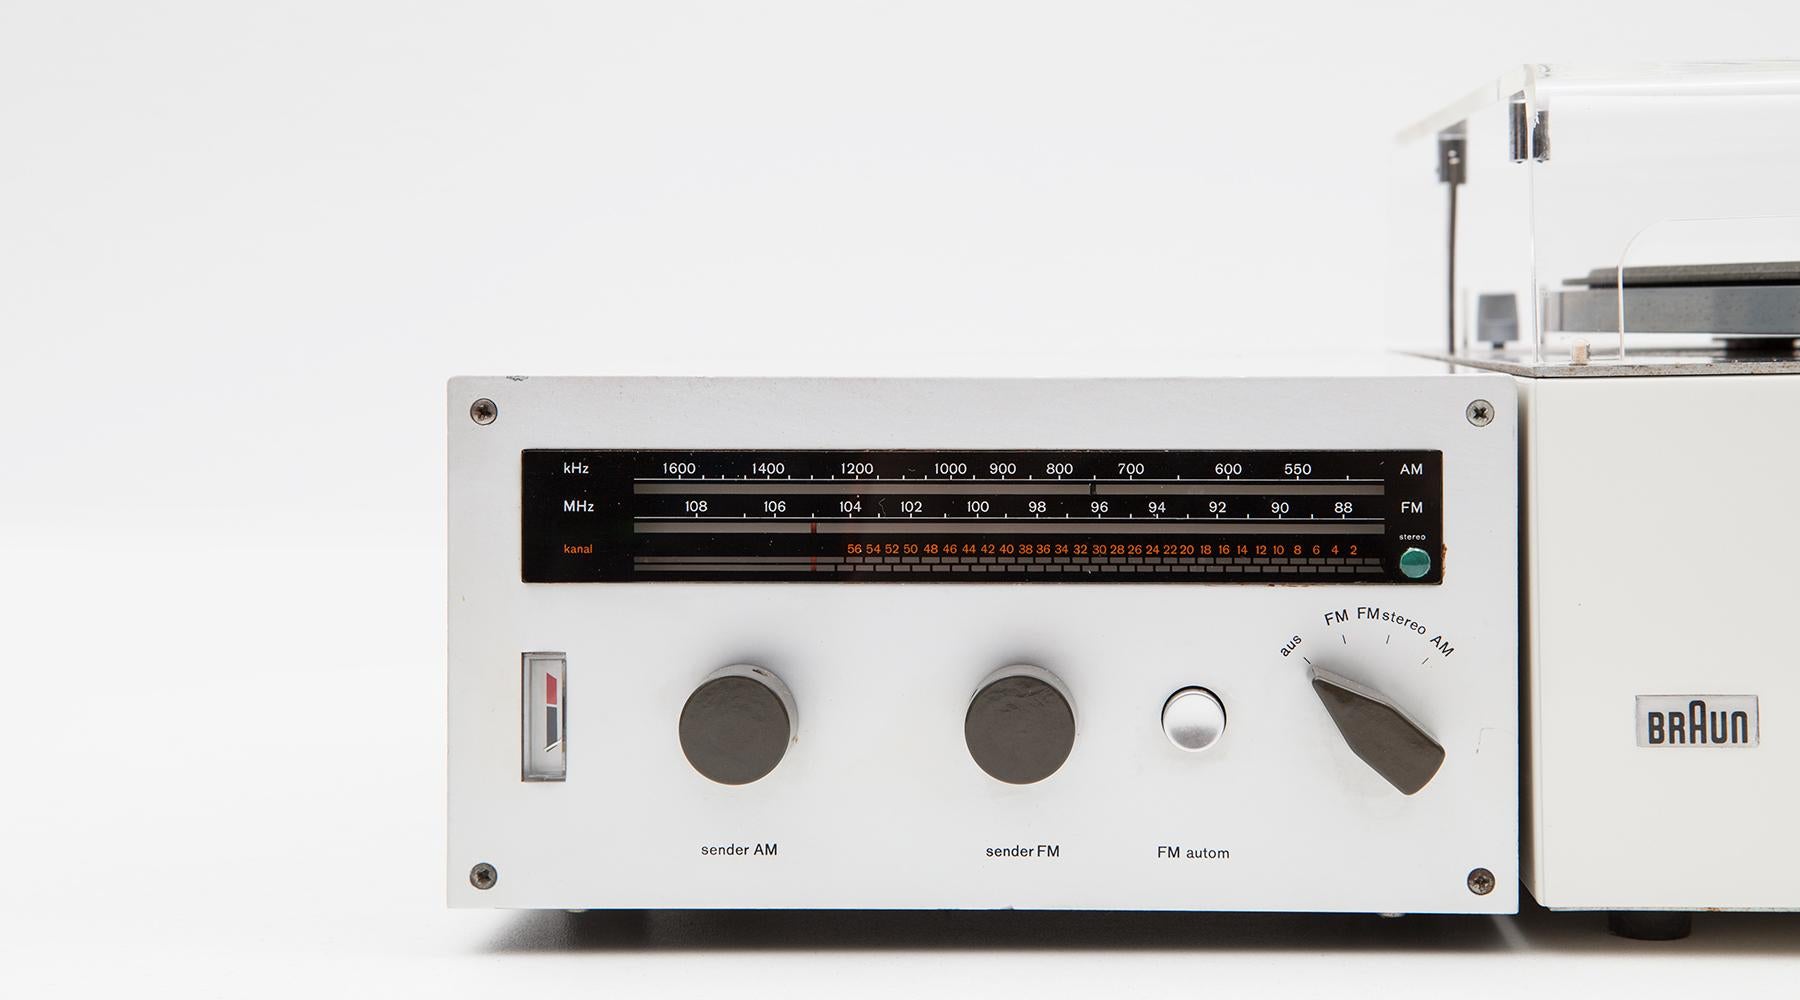 Stereo System, Design made in Germany, original by Dieter Rams.

Original Dieter Rams for Braun Stereo System. It consists of three parts. A CSV13 amplifier from 1961, CE16 radio from 1965 and PS400 turntable from 1965. Designed in Germany.